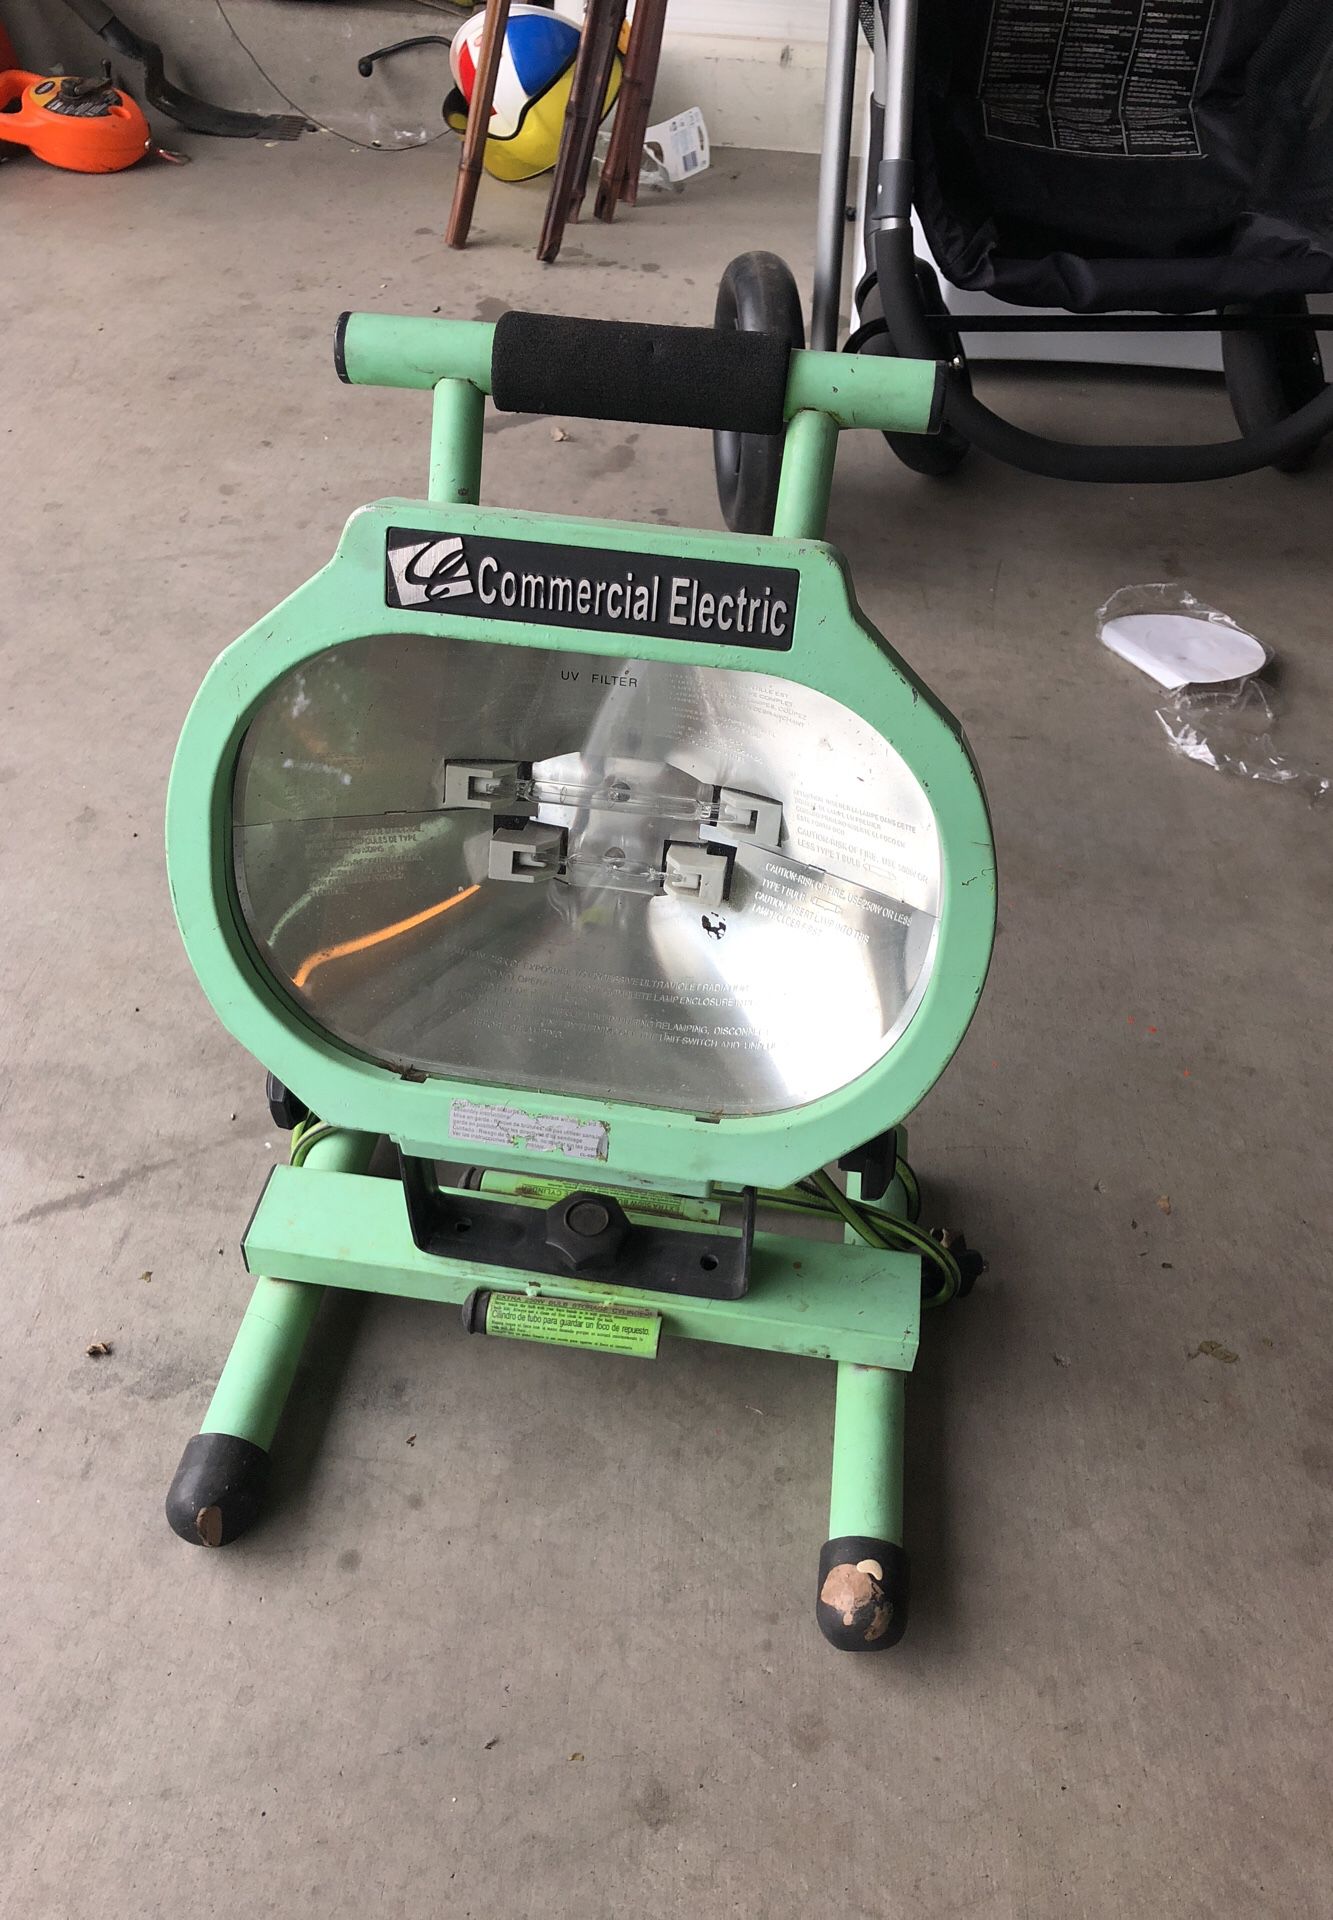 Commercial electric light